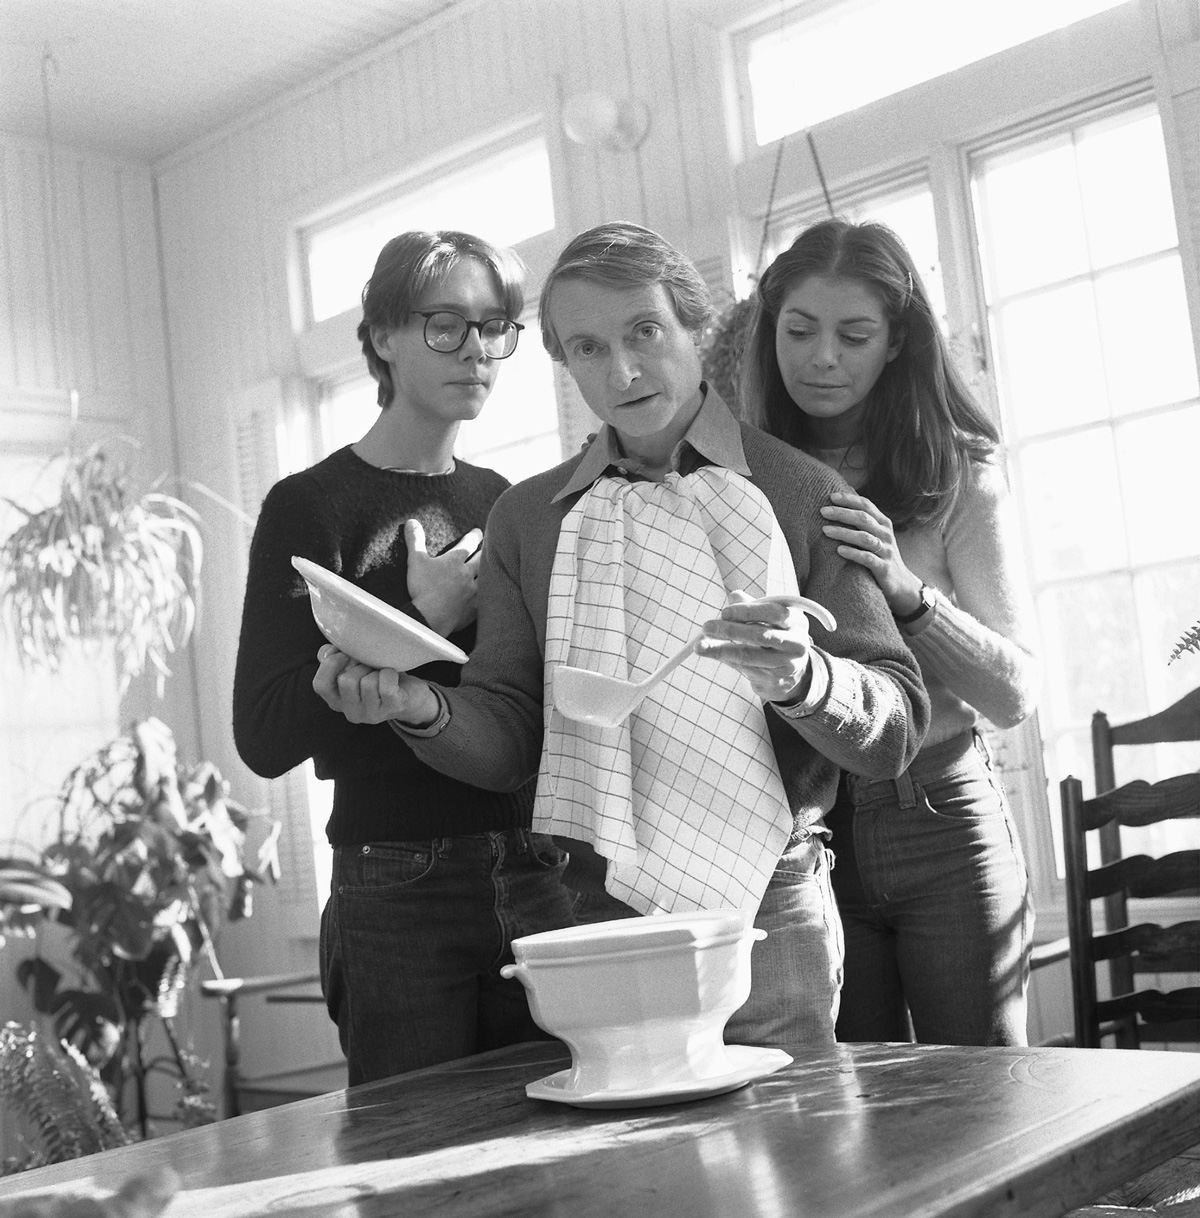 A photograph of Roy Lichtenstein with his family.